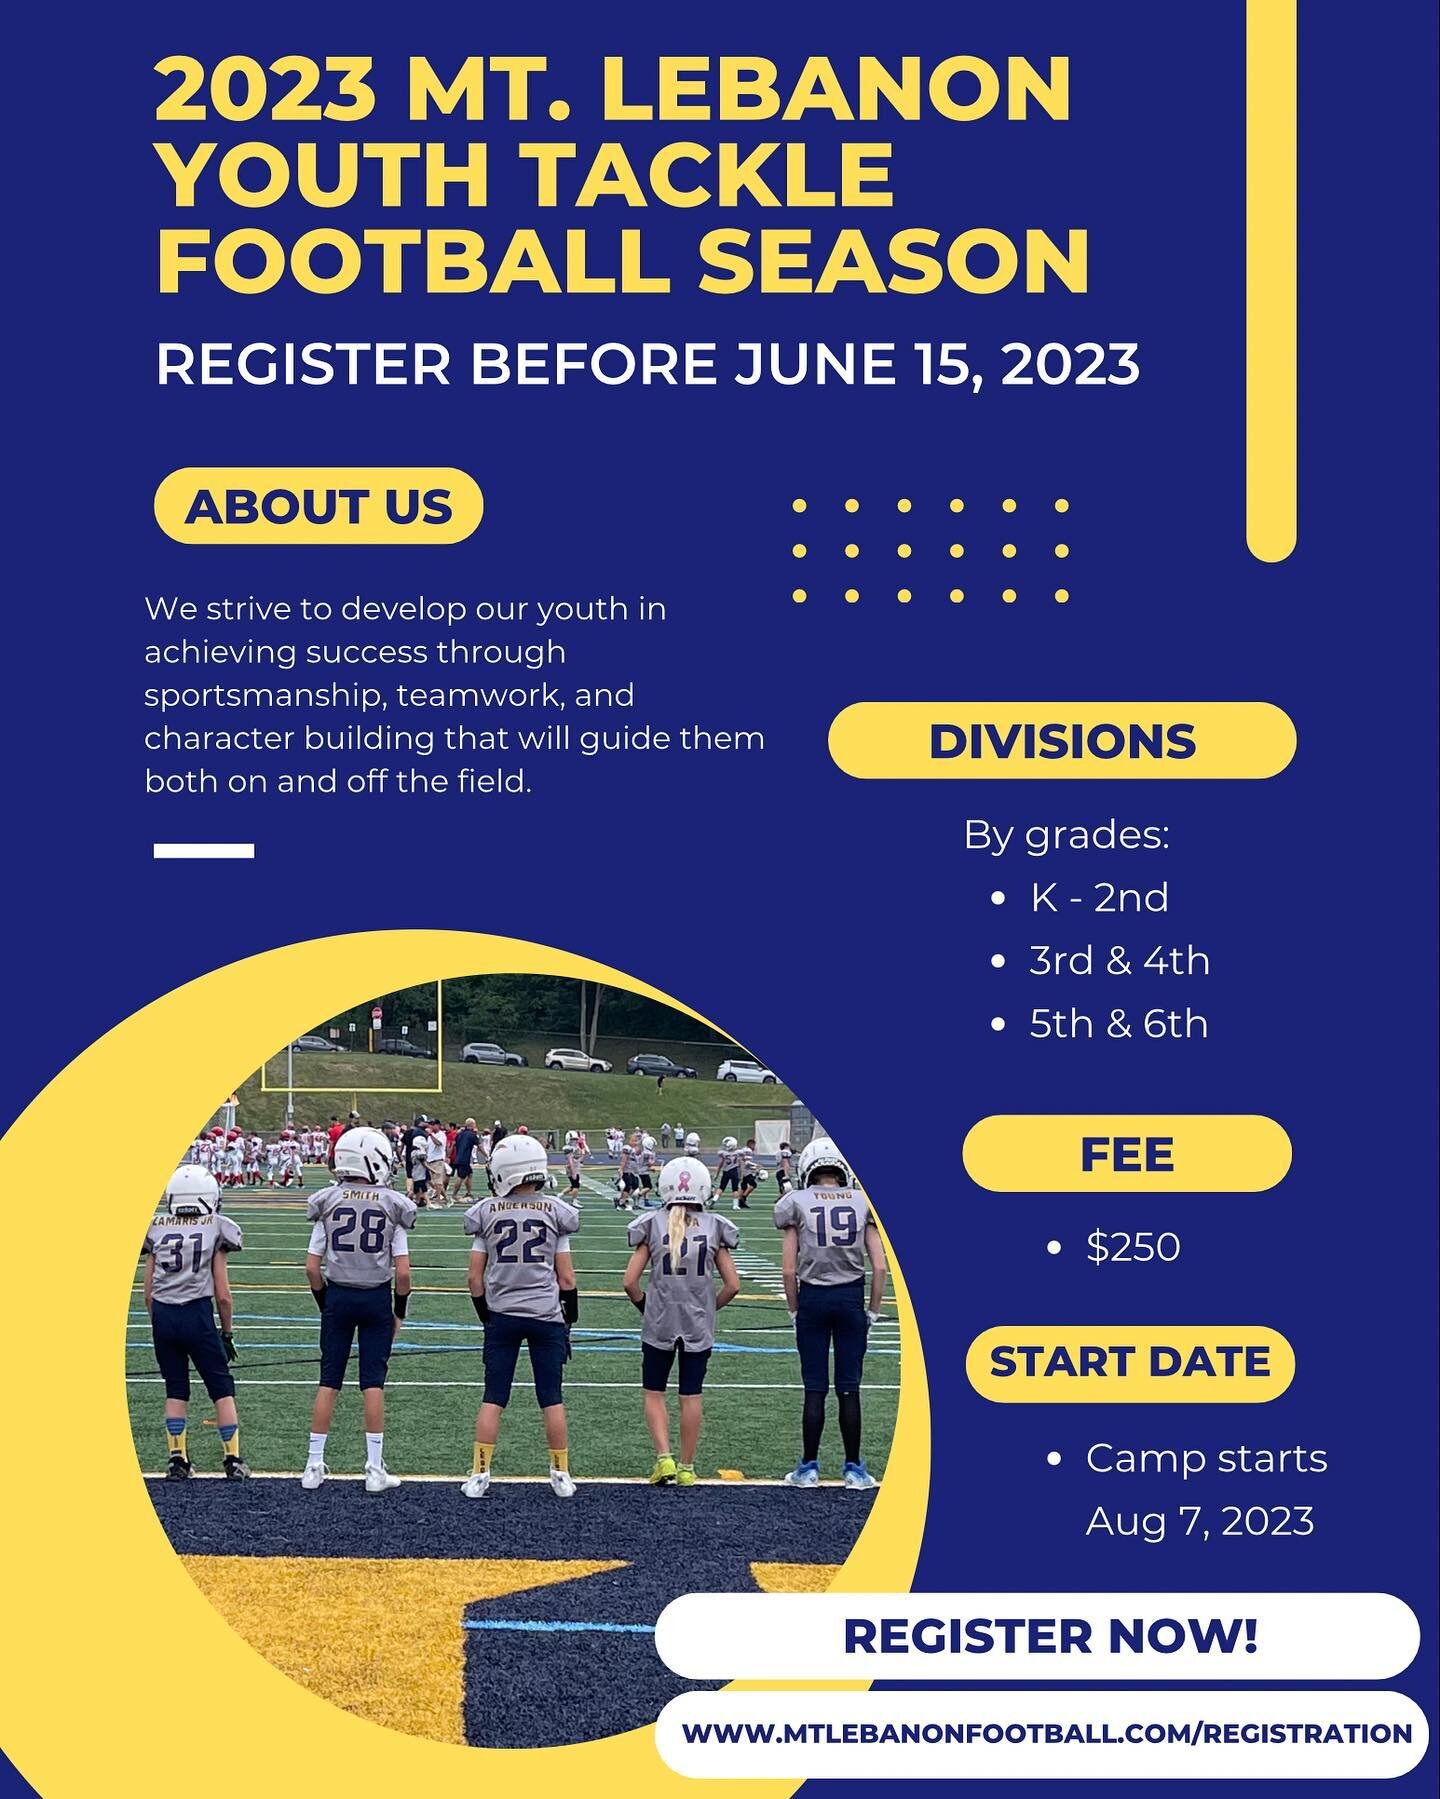 🏈REGISTRATION CLOSES JUNE 15, 2023🏈

Sign your kid(s) up for this upcoming season today! The league is starting to gather up information from all the schools participating to see how many kids are in the program and we want to ensure all the kids t